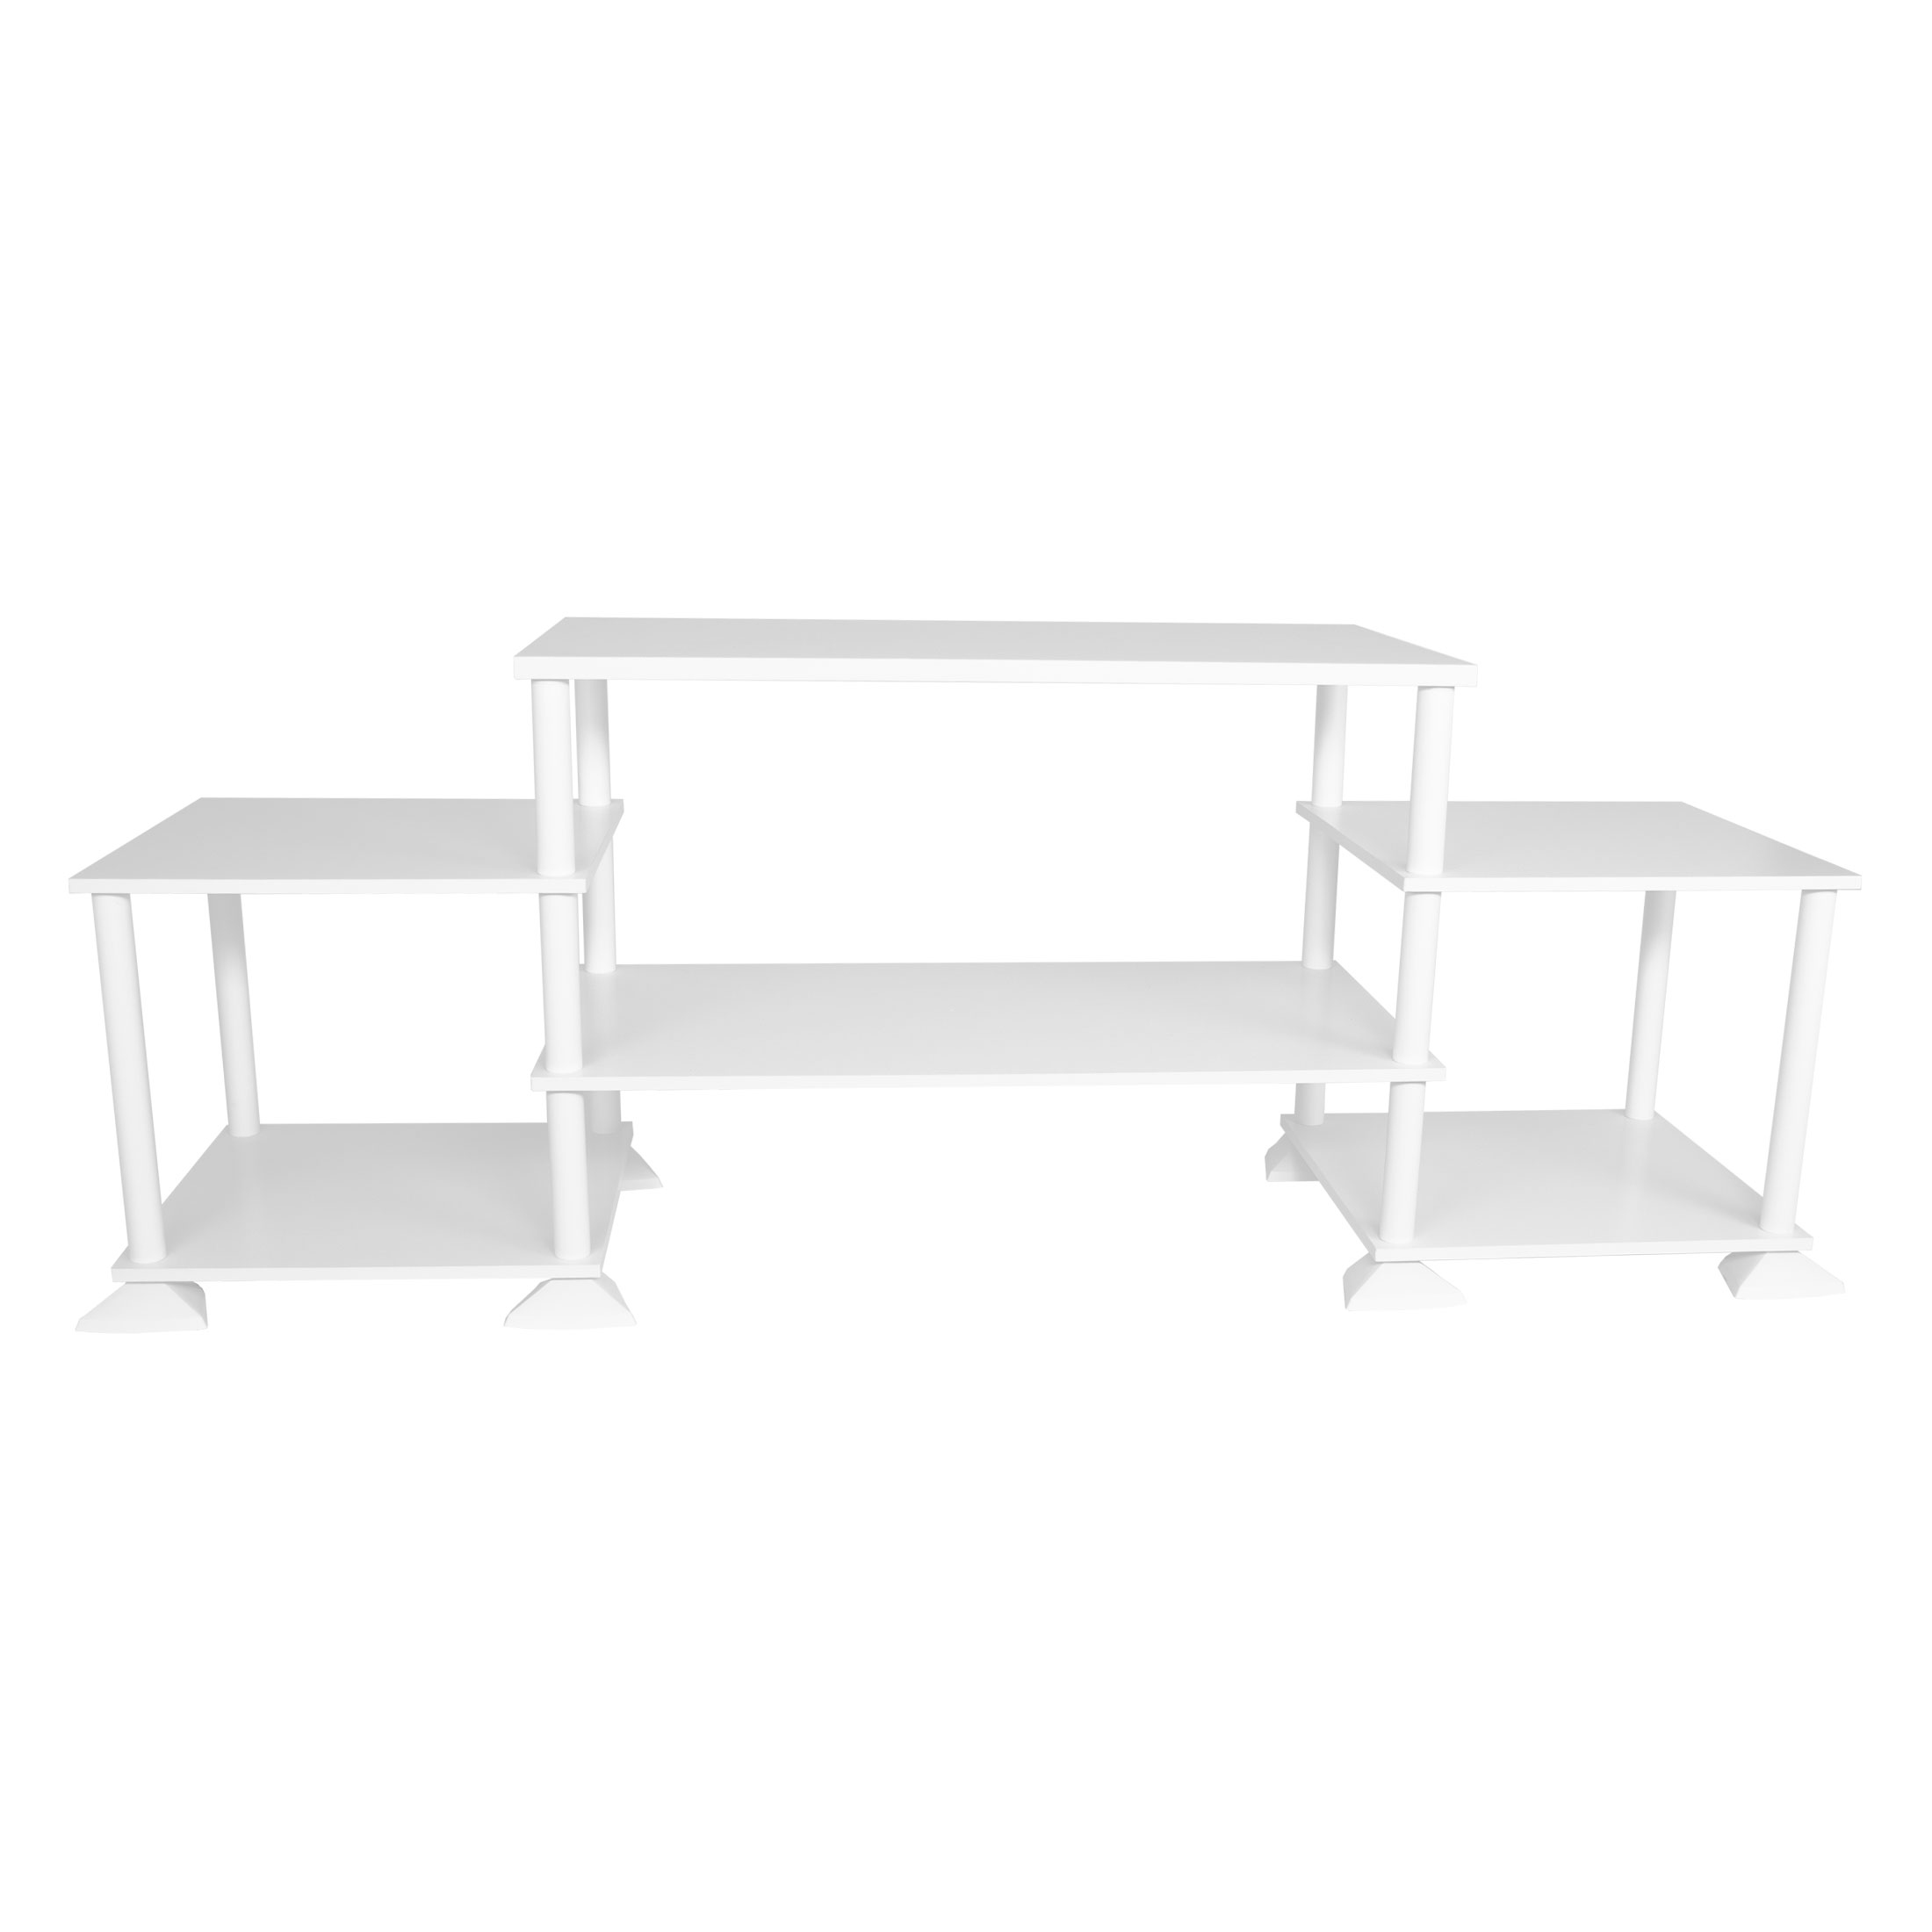 Mainstays No Tools Assembly TV Stand for TVs up to 40", White - image 2 of 5